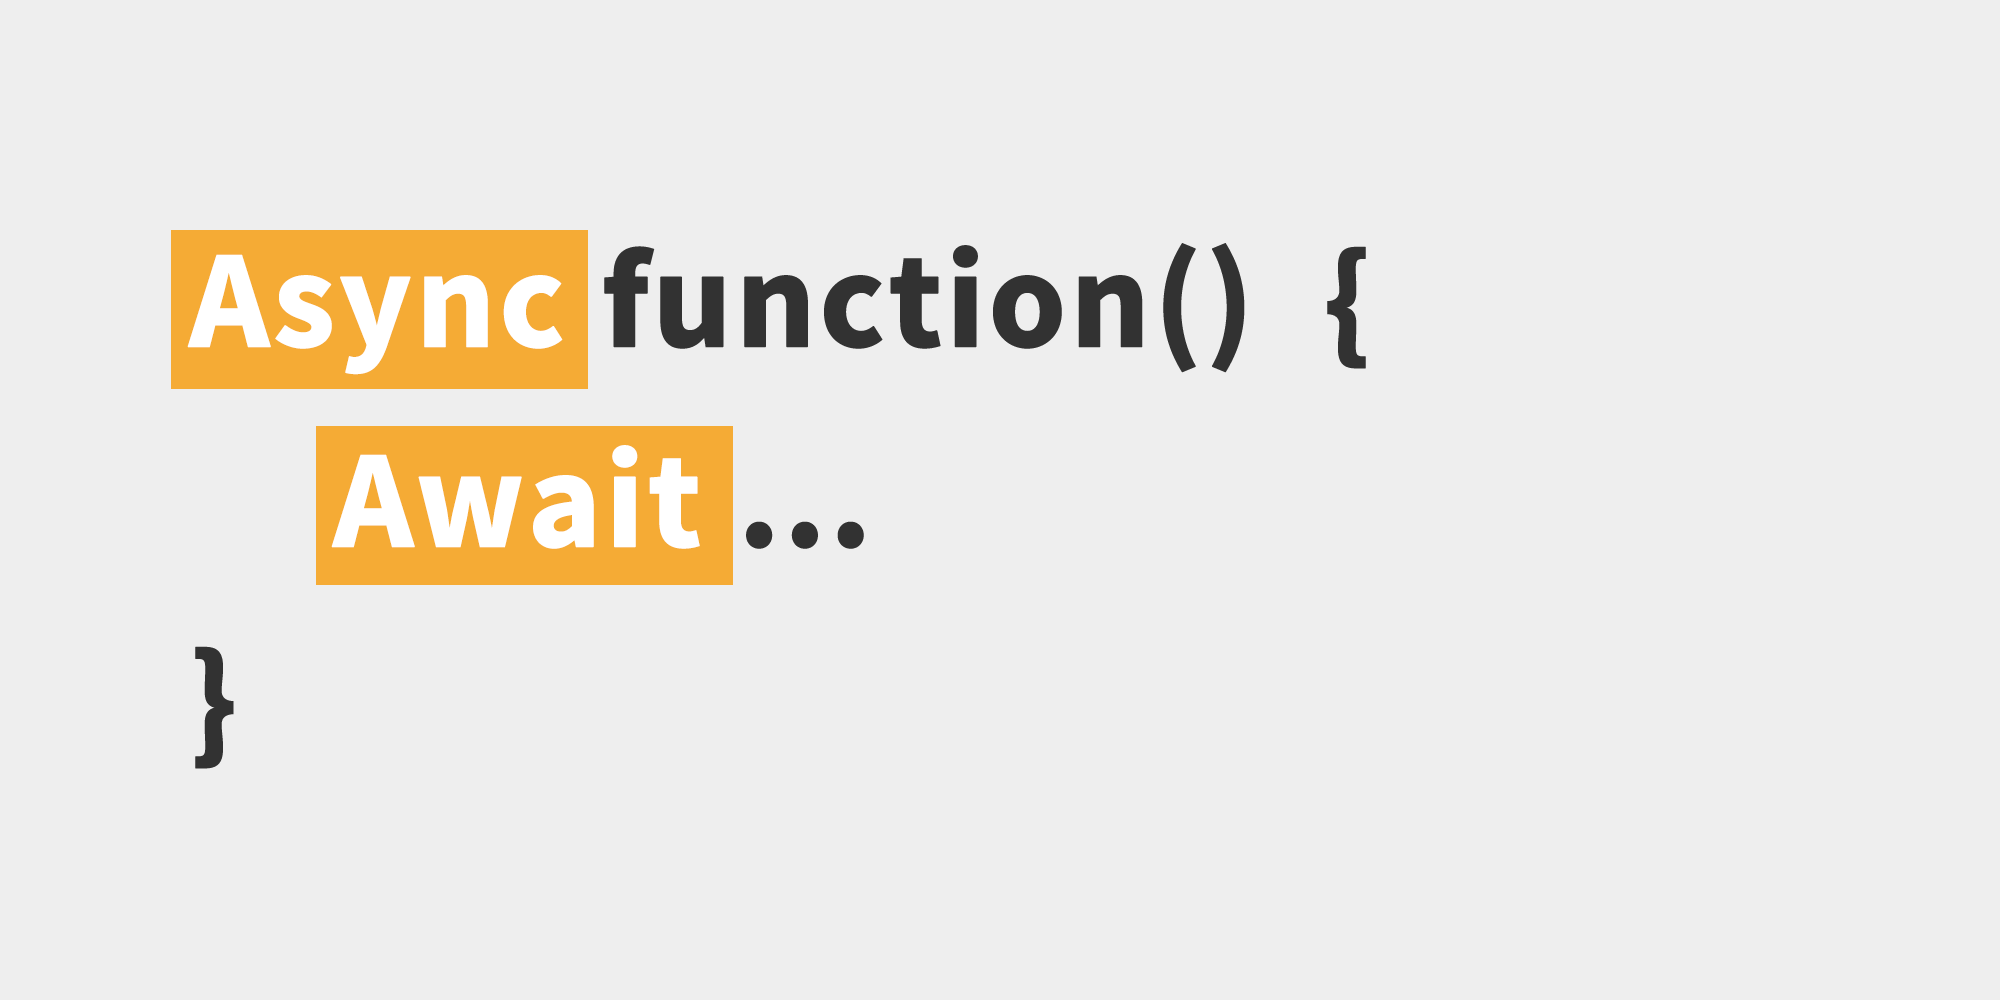 A quick guide to async/await in Javascript